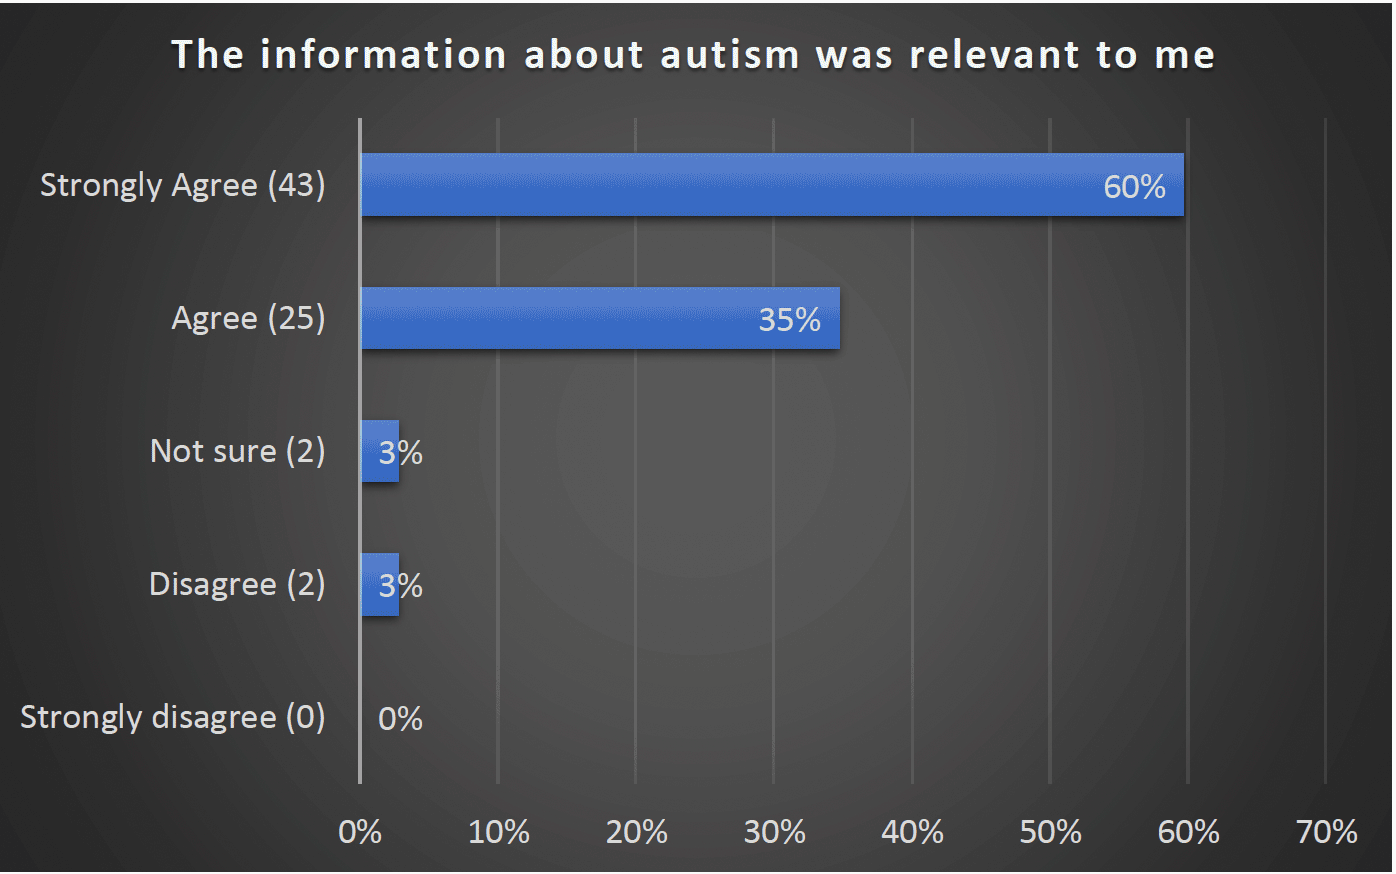 The information about autism was relevant to me - Strongly Agree (43) 60%, Agree (25) 35%, Not sure (2) 3%, Disagree (2) 3%, Strongly disagree 0